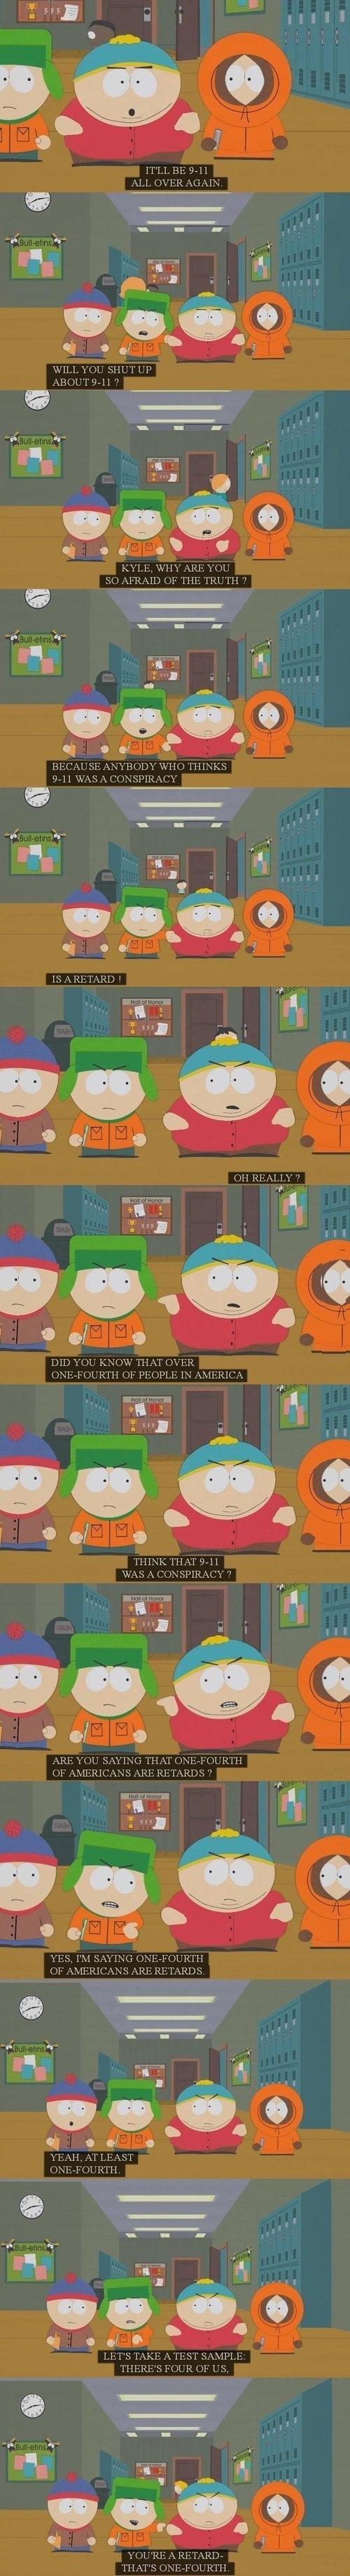 One-fourth of 'Murica according to South Park